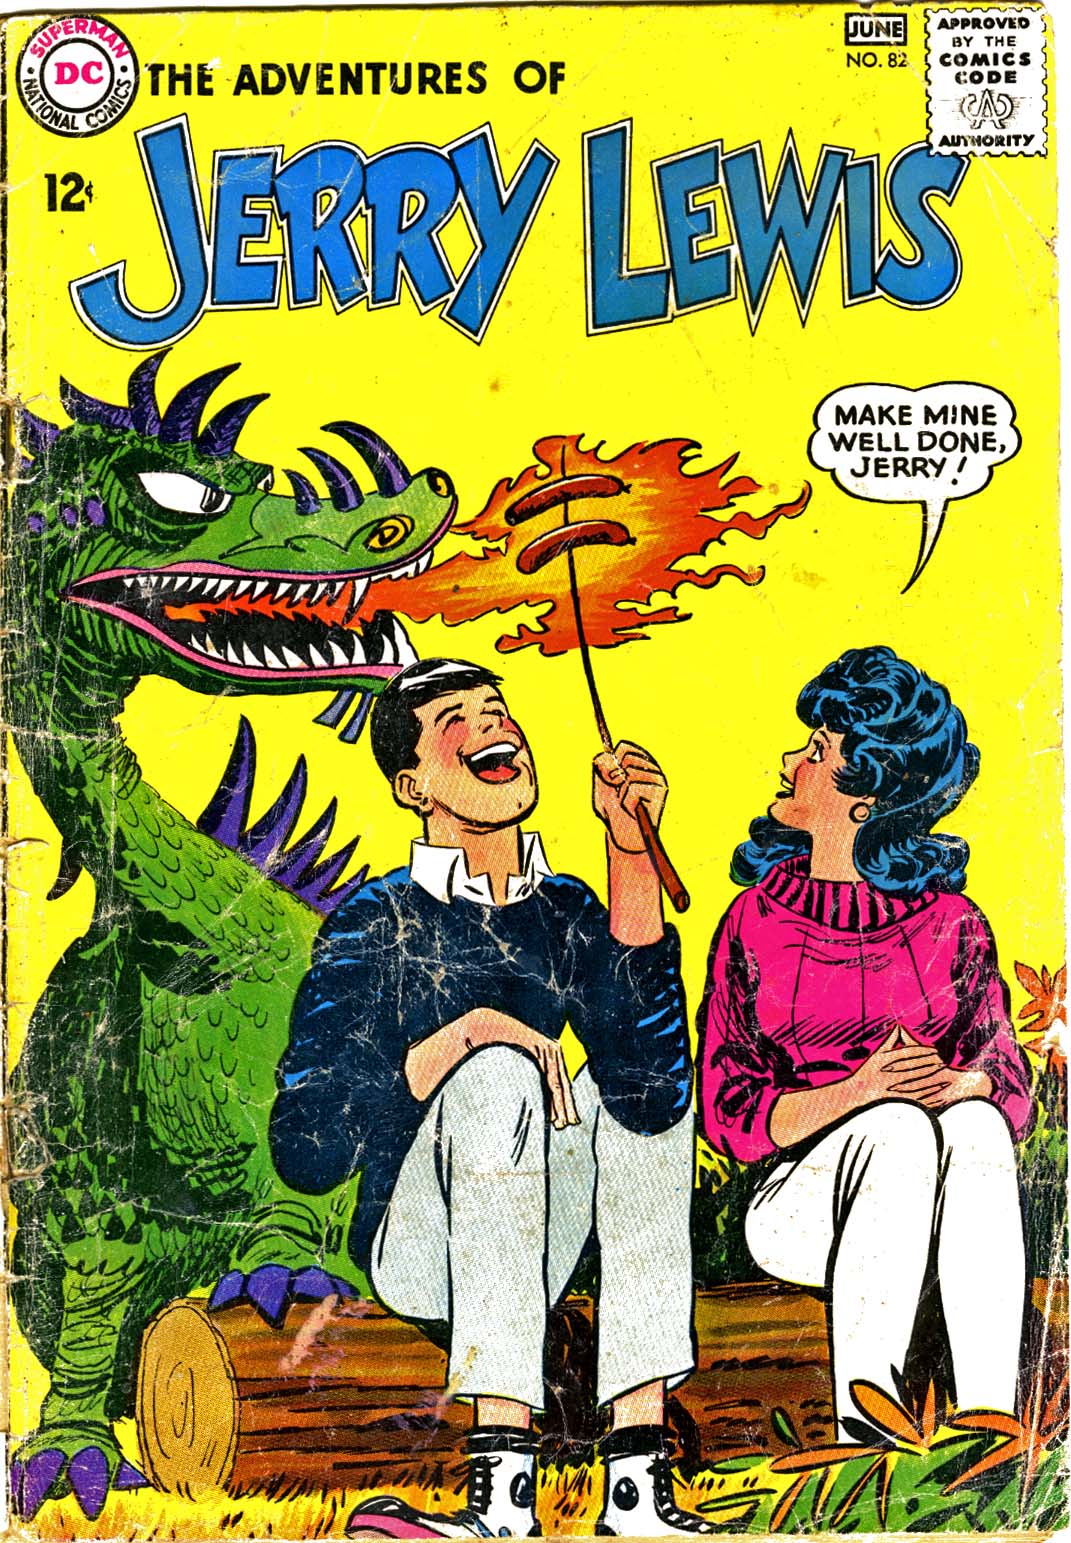 Read online The Adventures of Jerry Lewis comic -  Issue #82 - 1